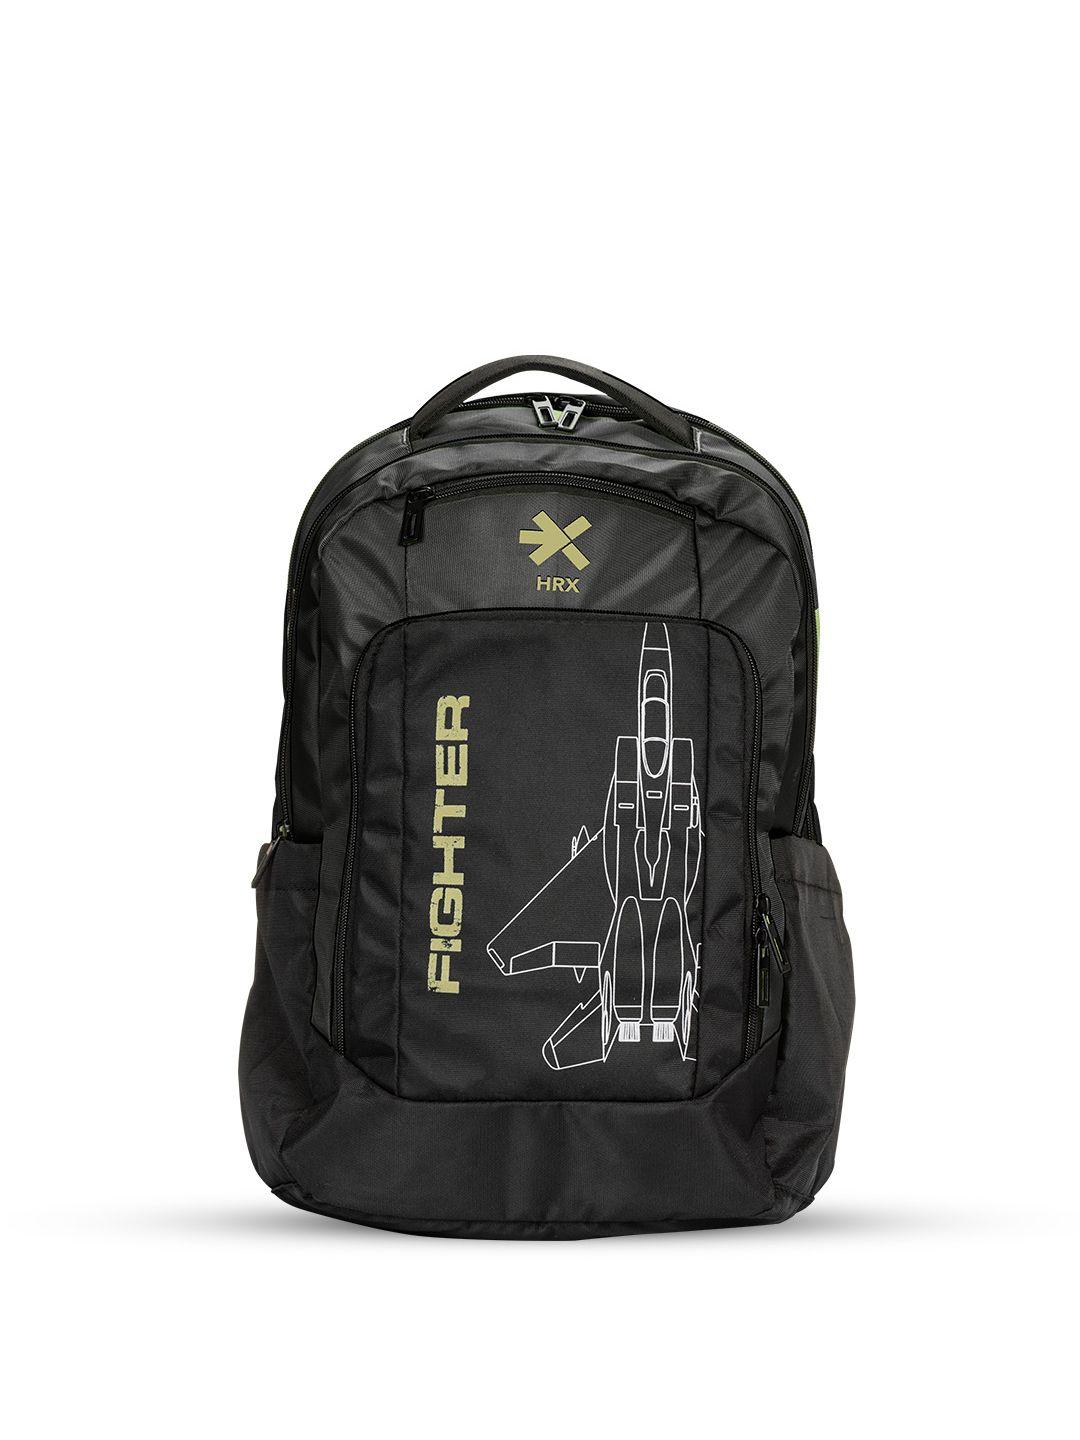 hrx by hrithik roshan unisex black & yellow brand logo backpack- laptop up to 16 inch